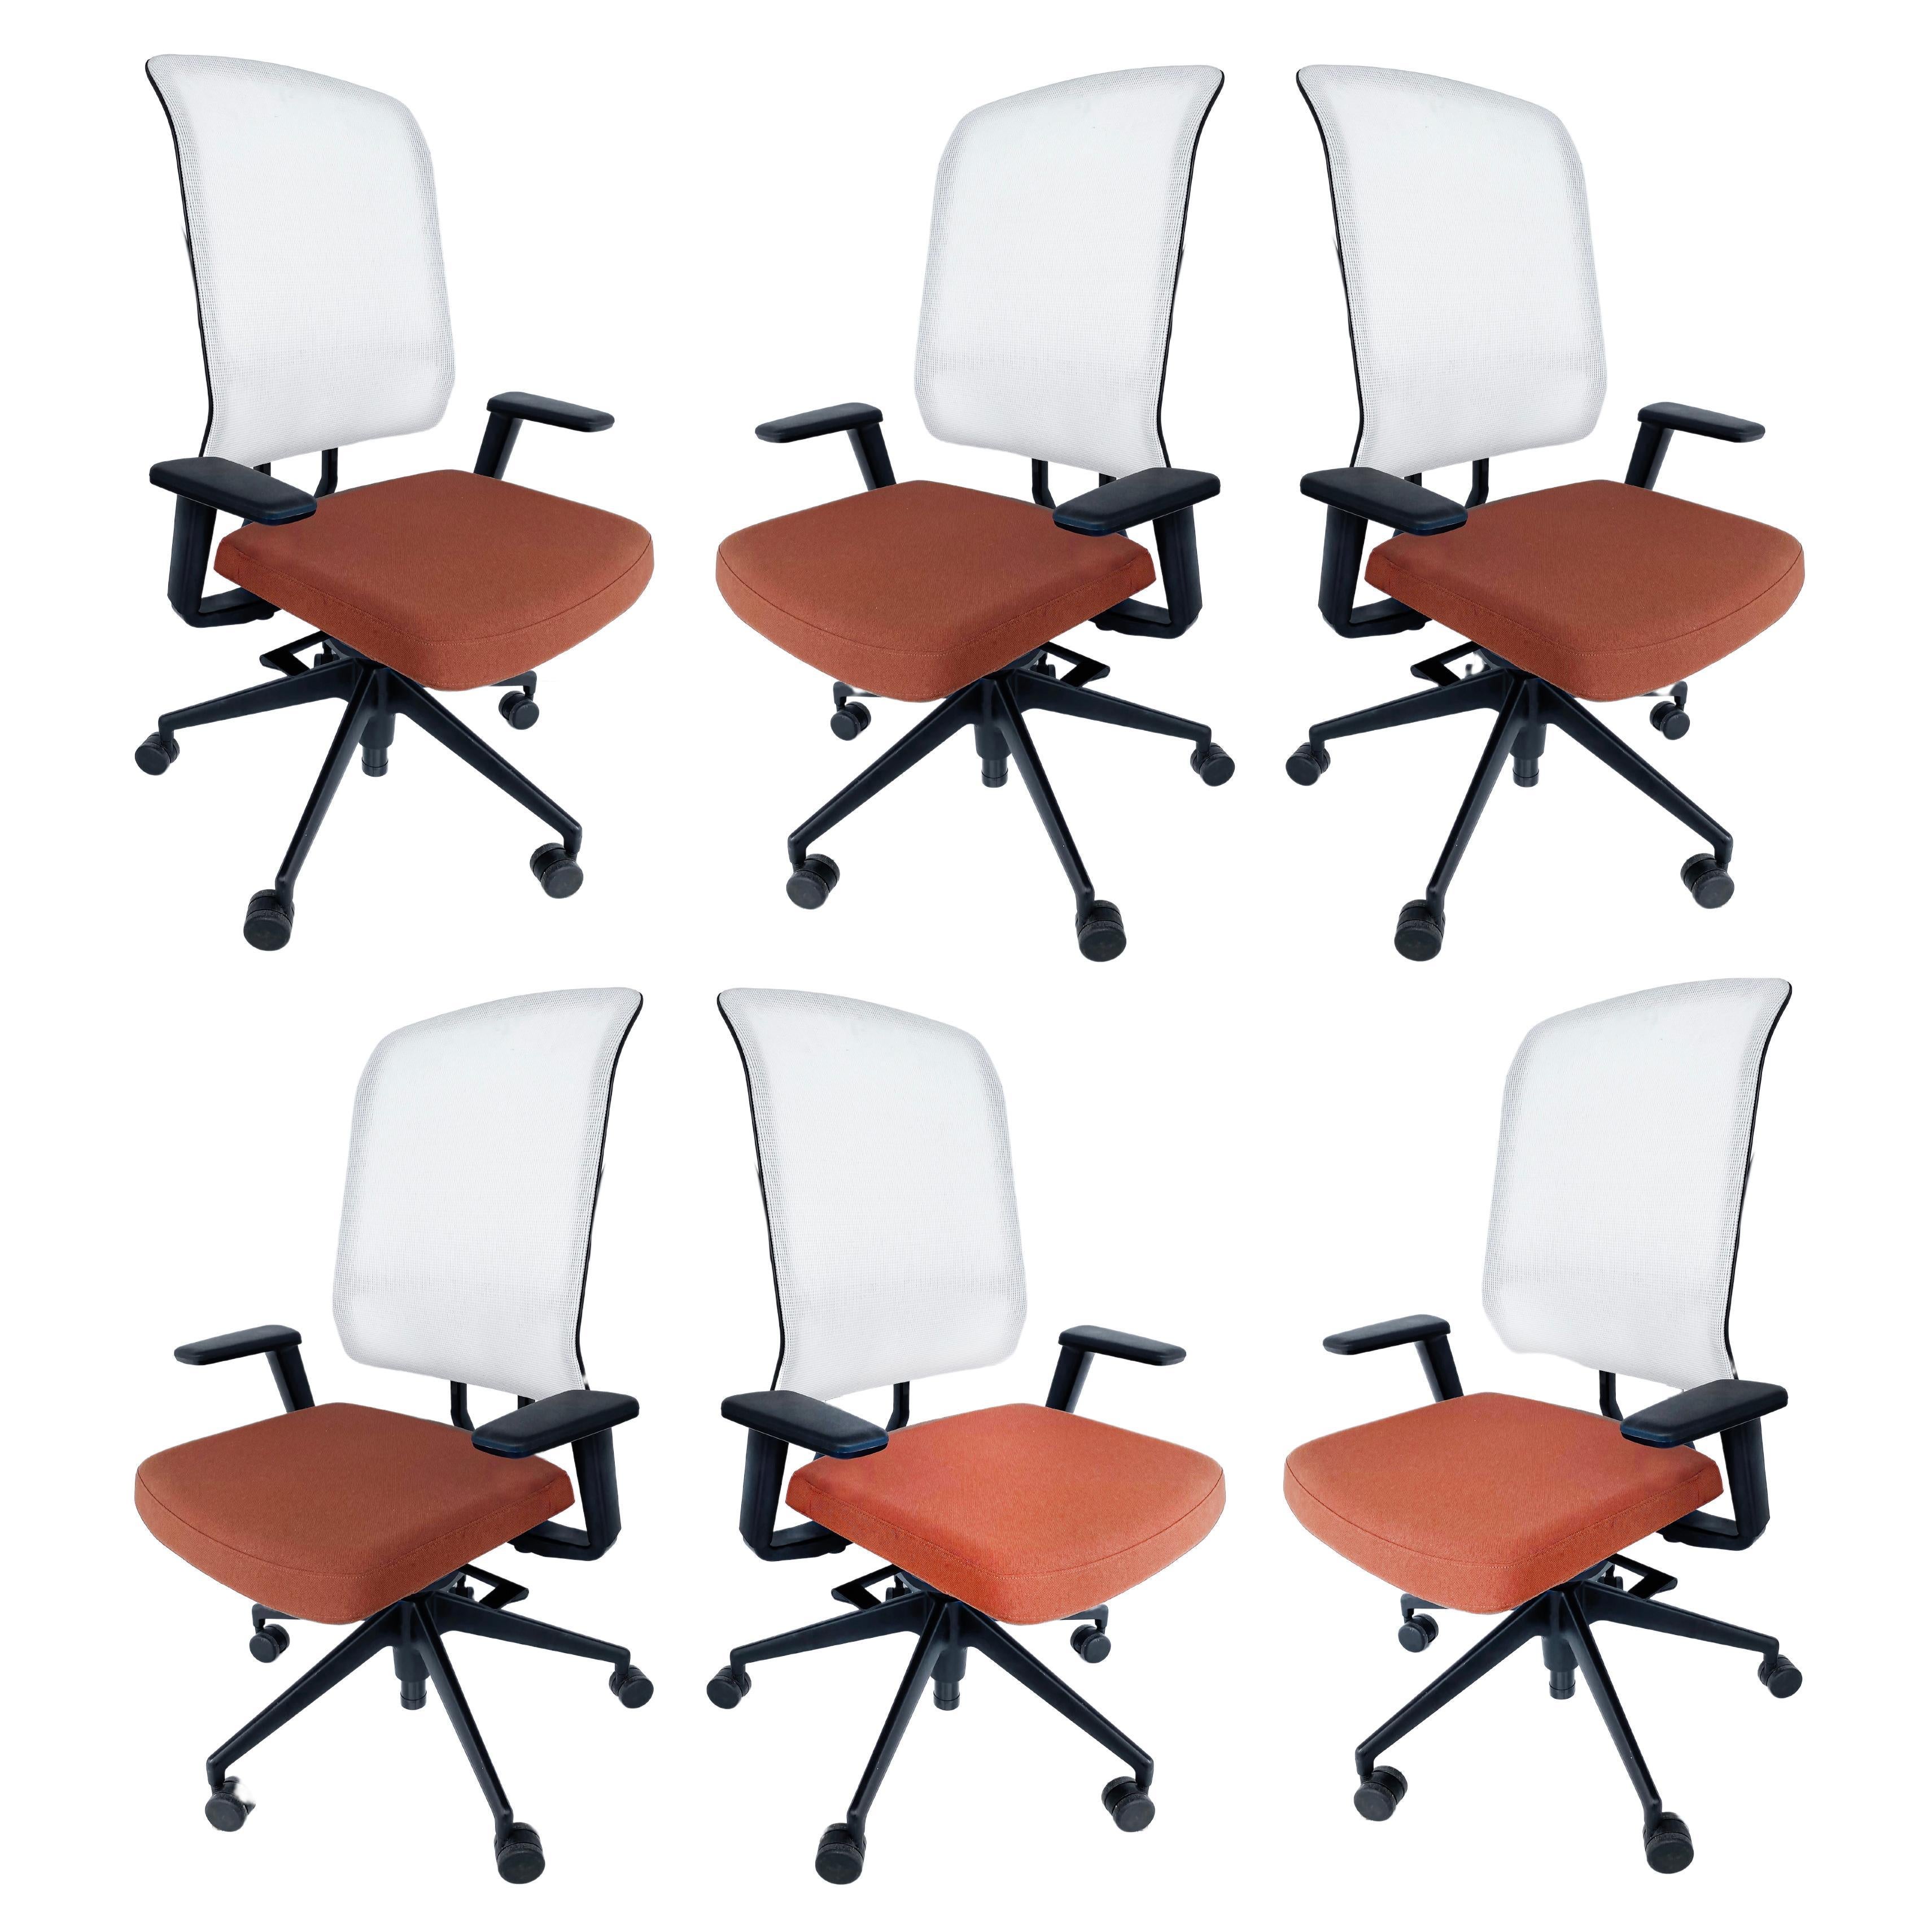 Vitra AM Fully Adjustable Ergonomic Office Chairs by Alberto Meda 2021 For Sale